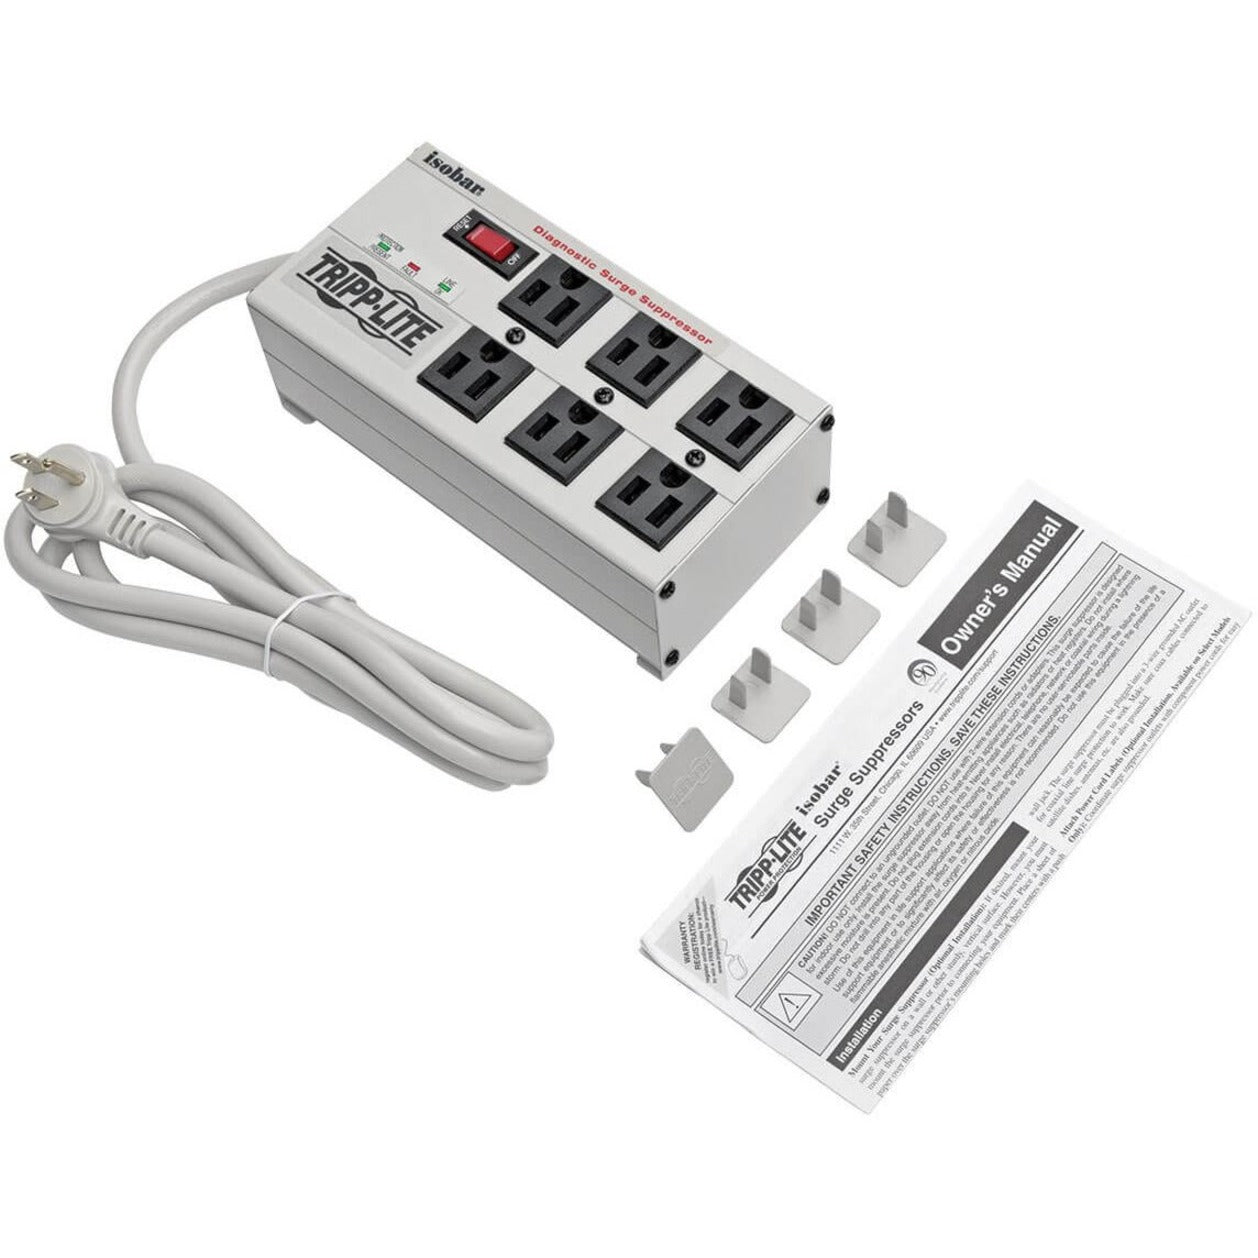 Tripp Lite Isobar 6-Outlet Surge Protector 6 ft. Cord with Right-Angle Plug 3300 Joules Diagnostic LEDs Metal Housing